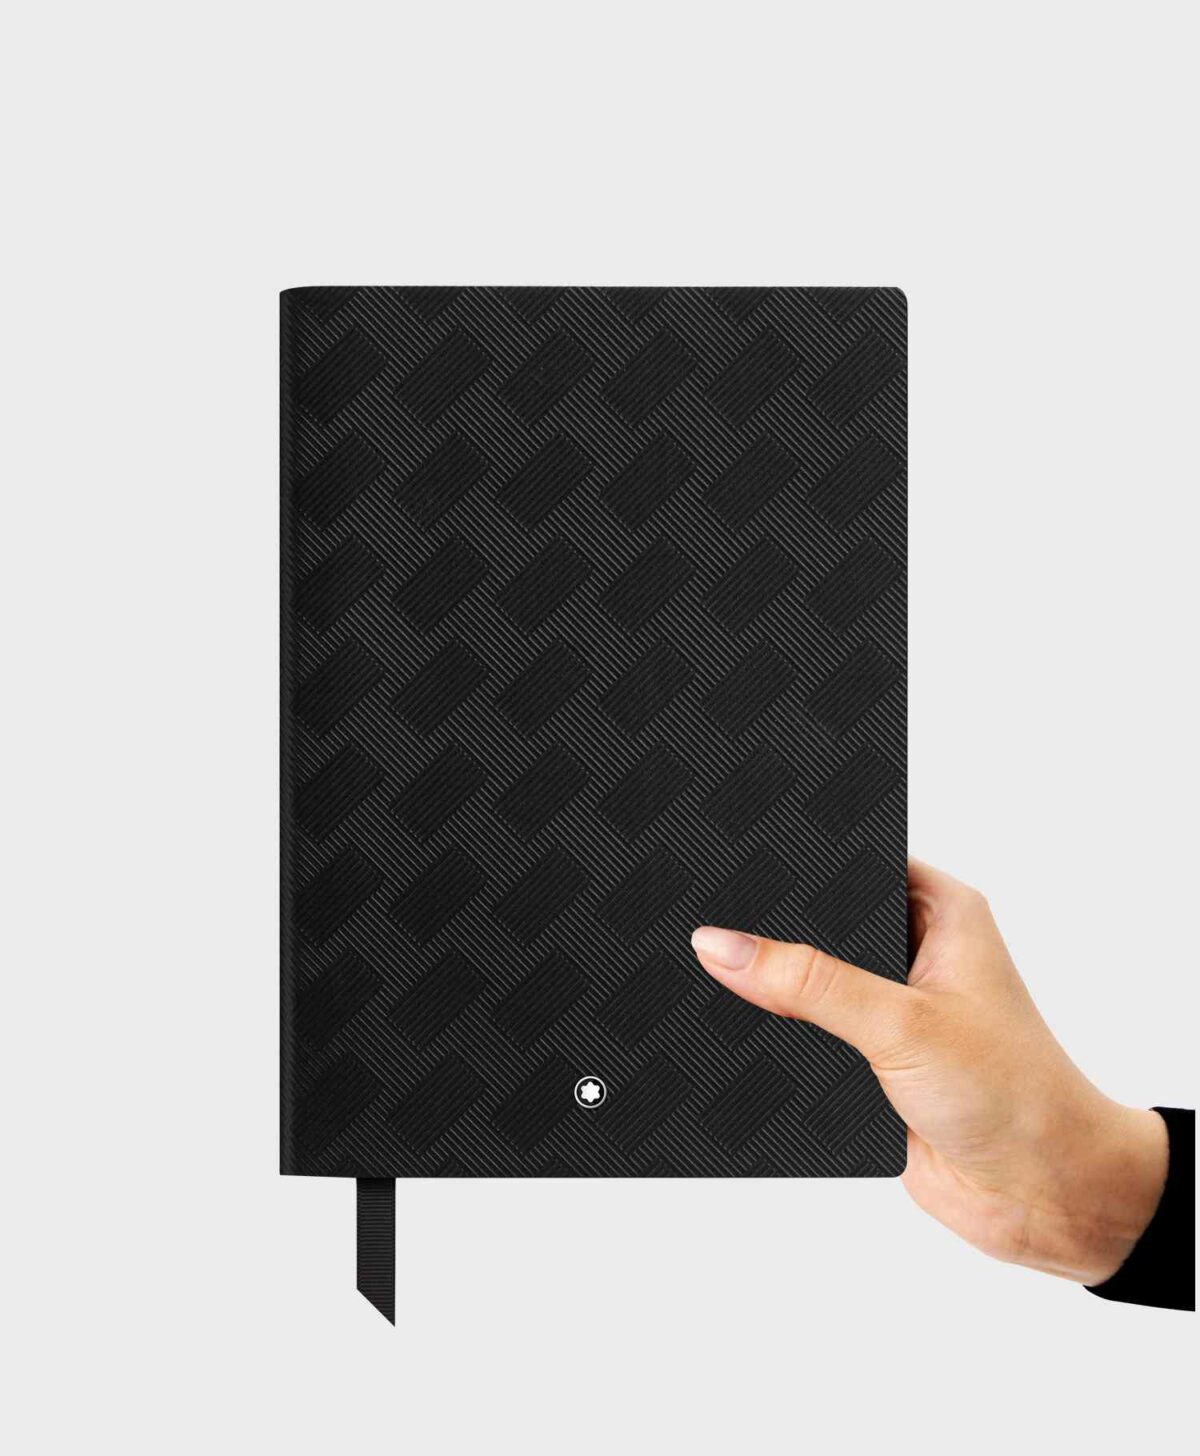 Sổ Montblanc Notebook #146 small, Extreme 3.0 collection, black lined MB130578